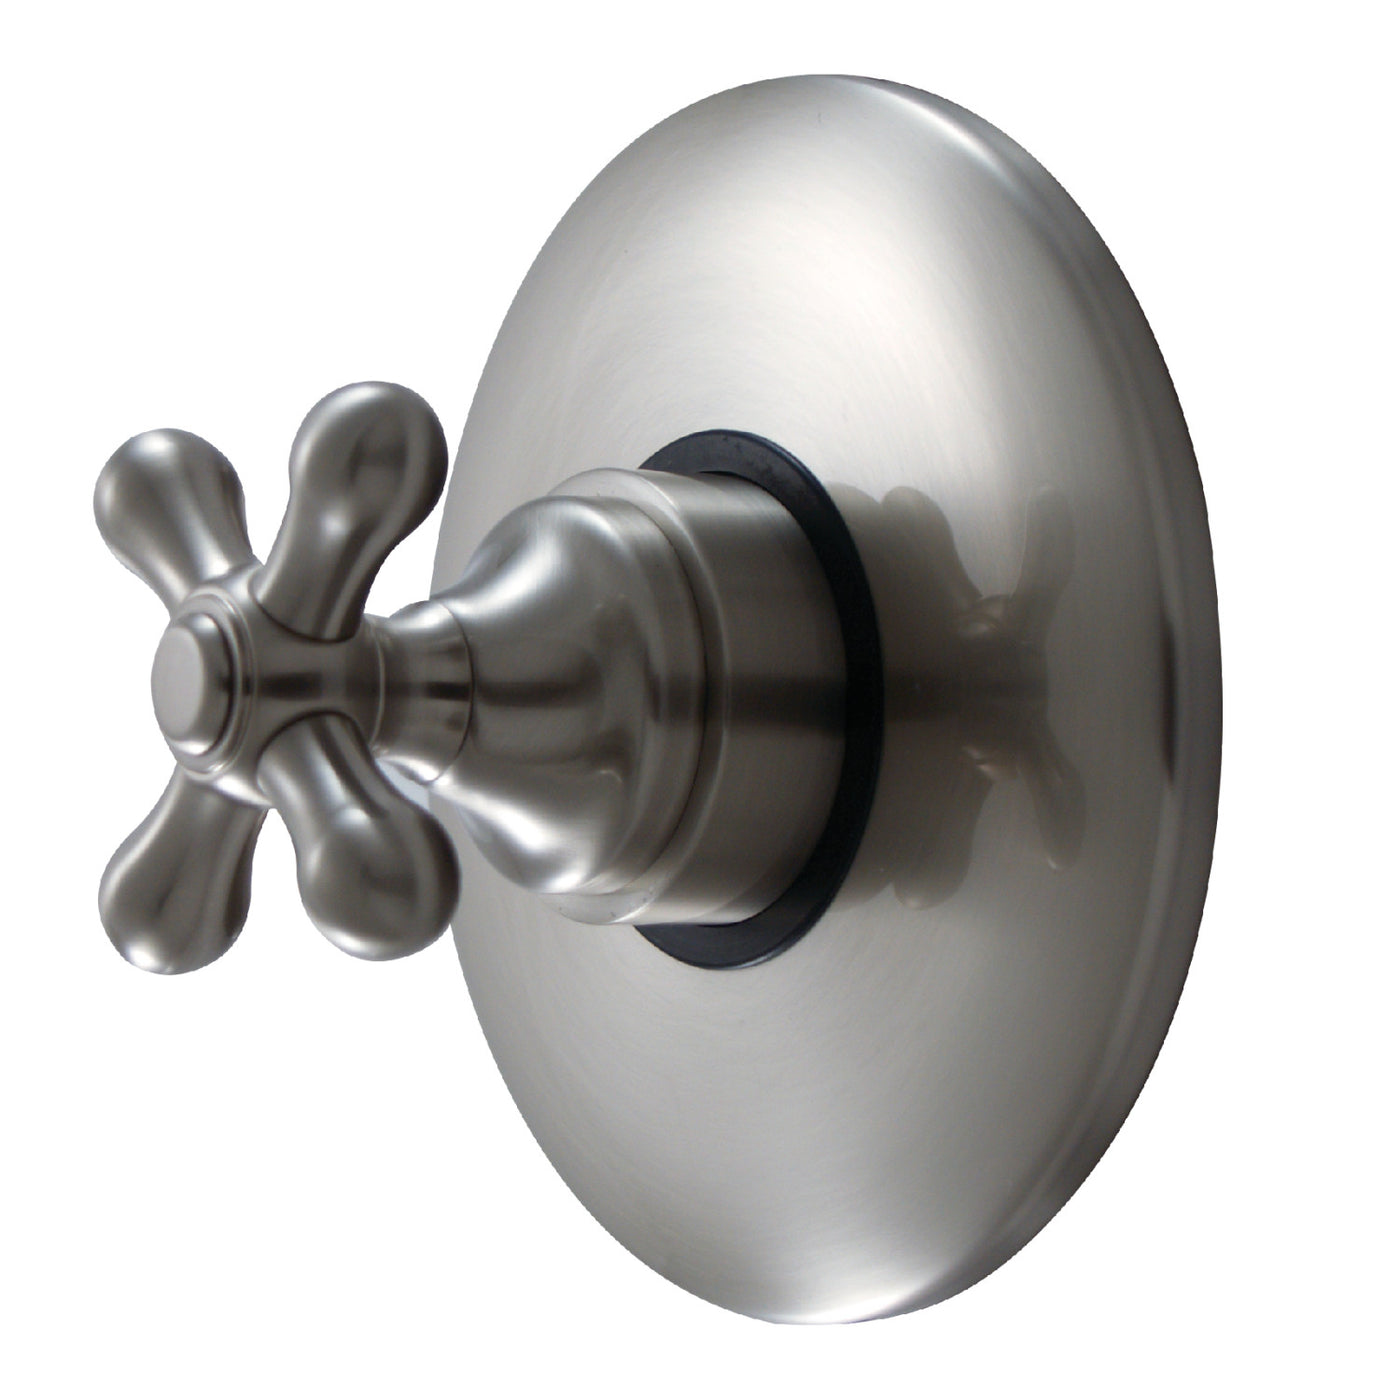 Elements of Design EB3008AX Volume Control, Brushed Nickel